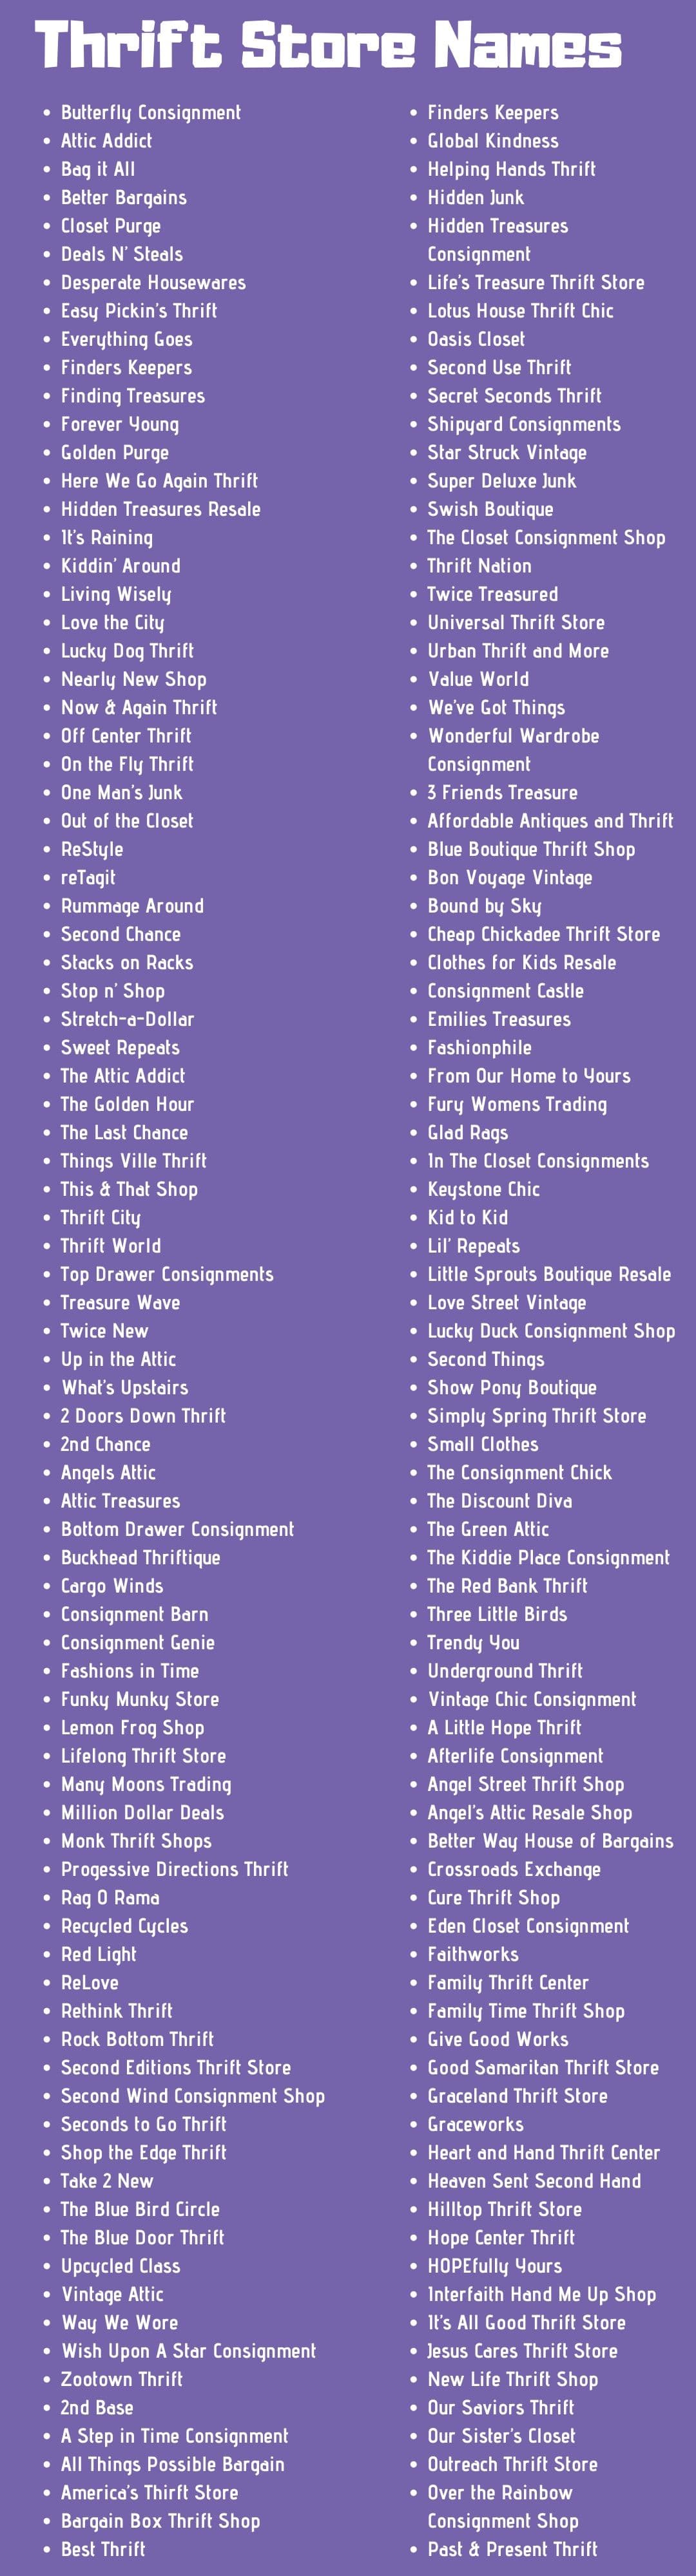 900+ Catchy Thrift Store Names Ideas and Suggestions